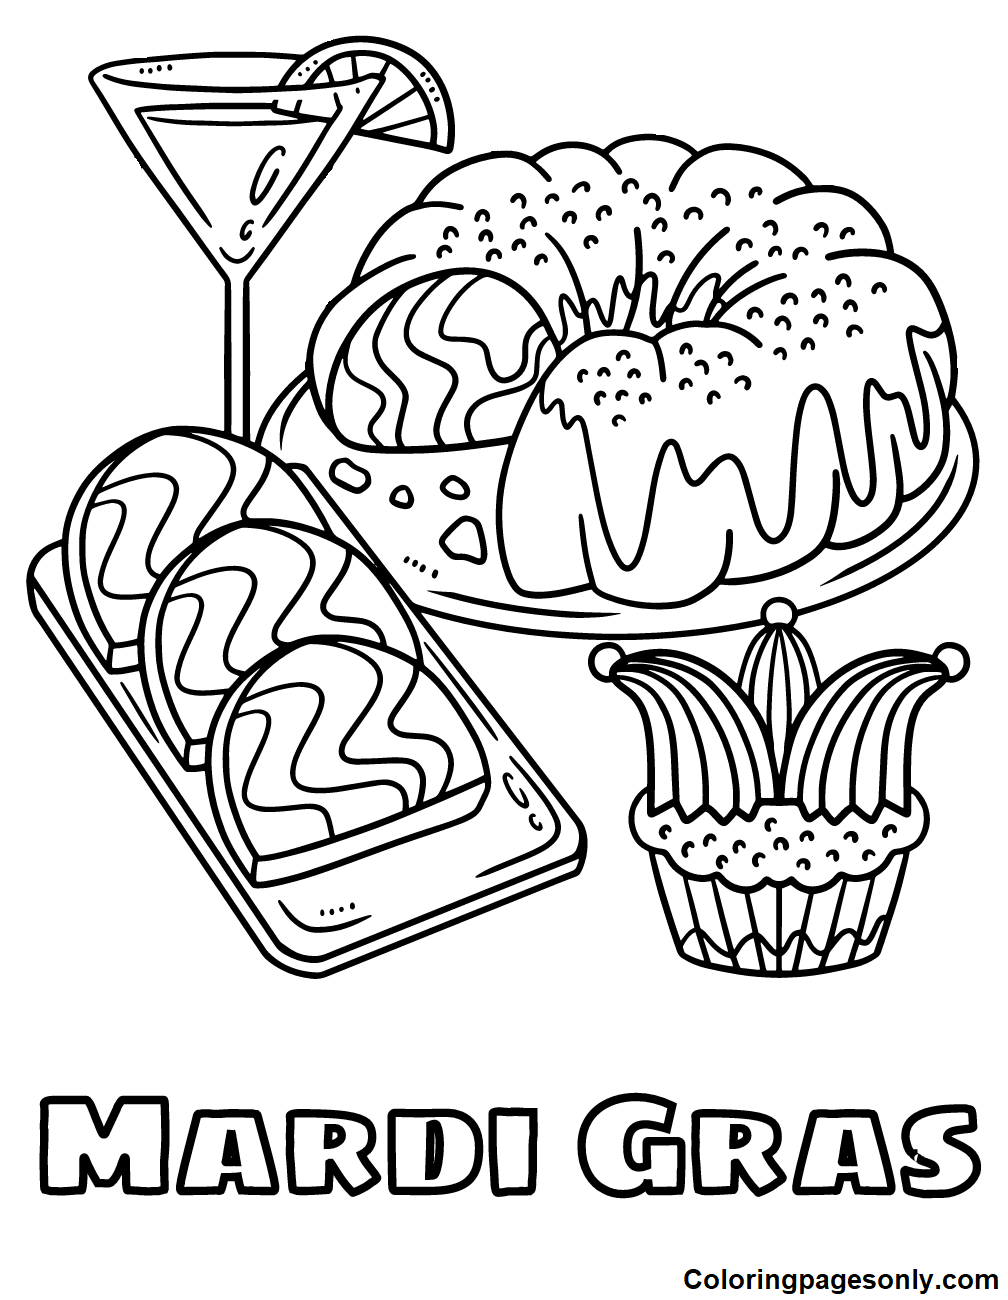 Fat Tuesday – Mardi Gras Coloring Pages